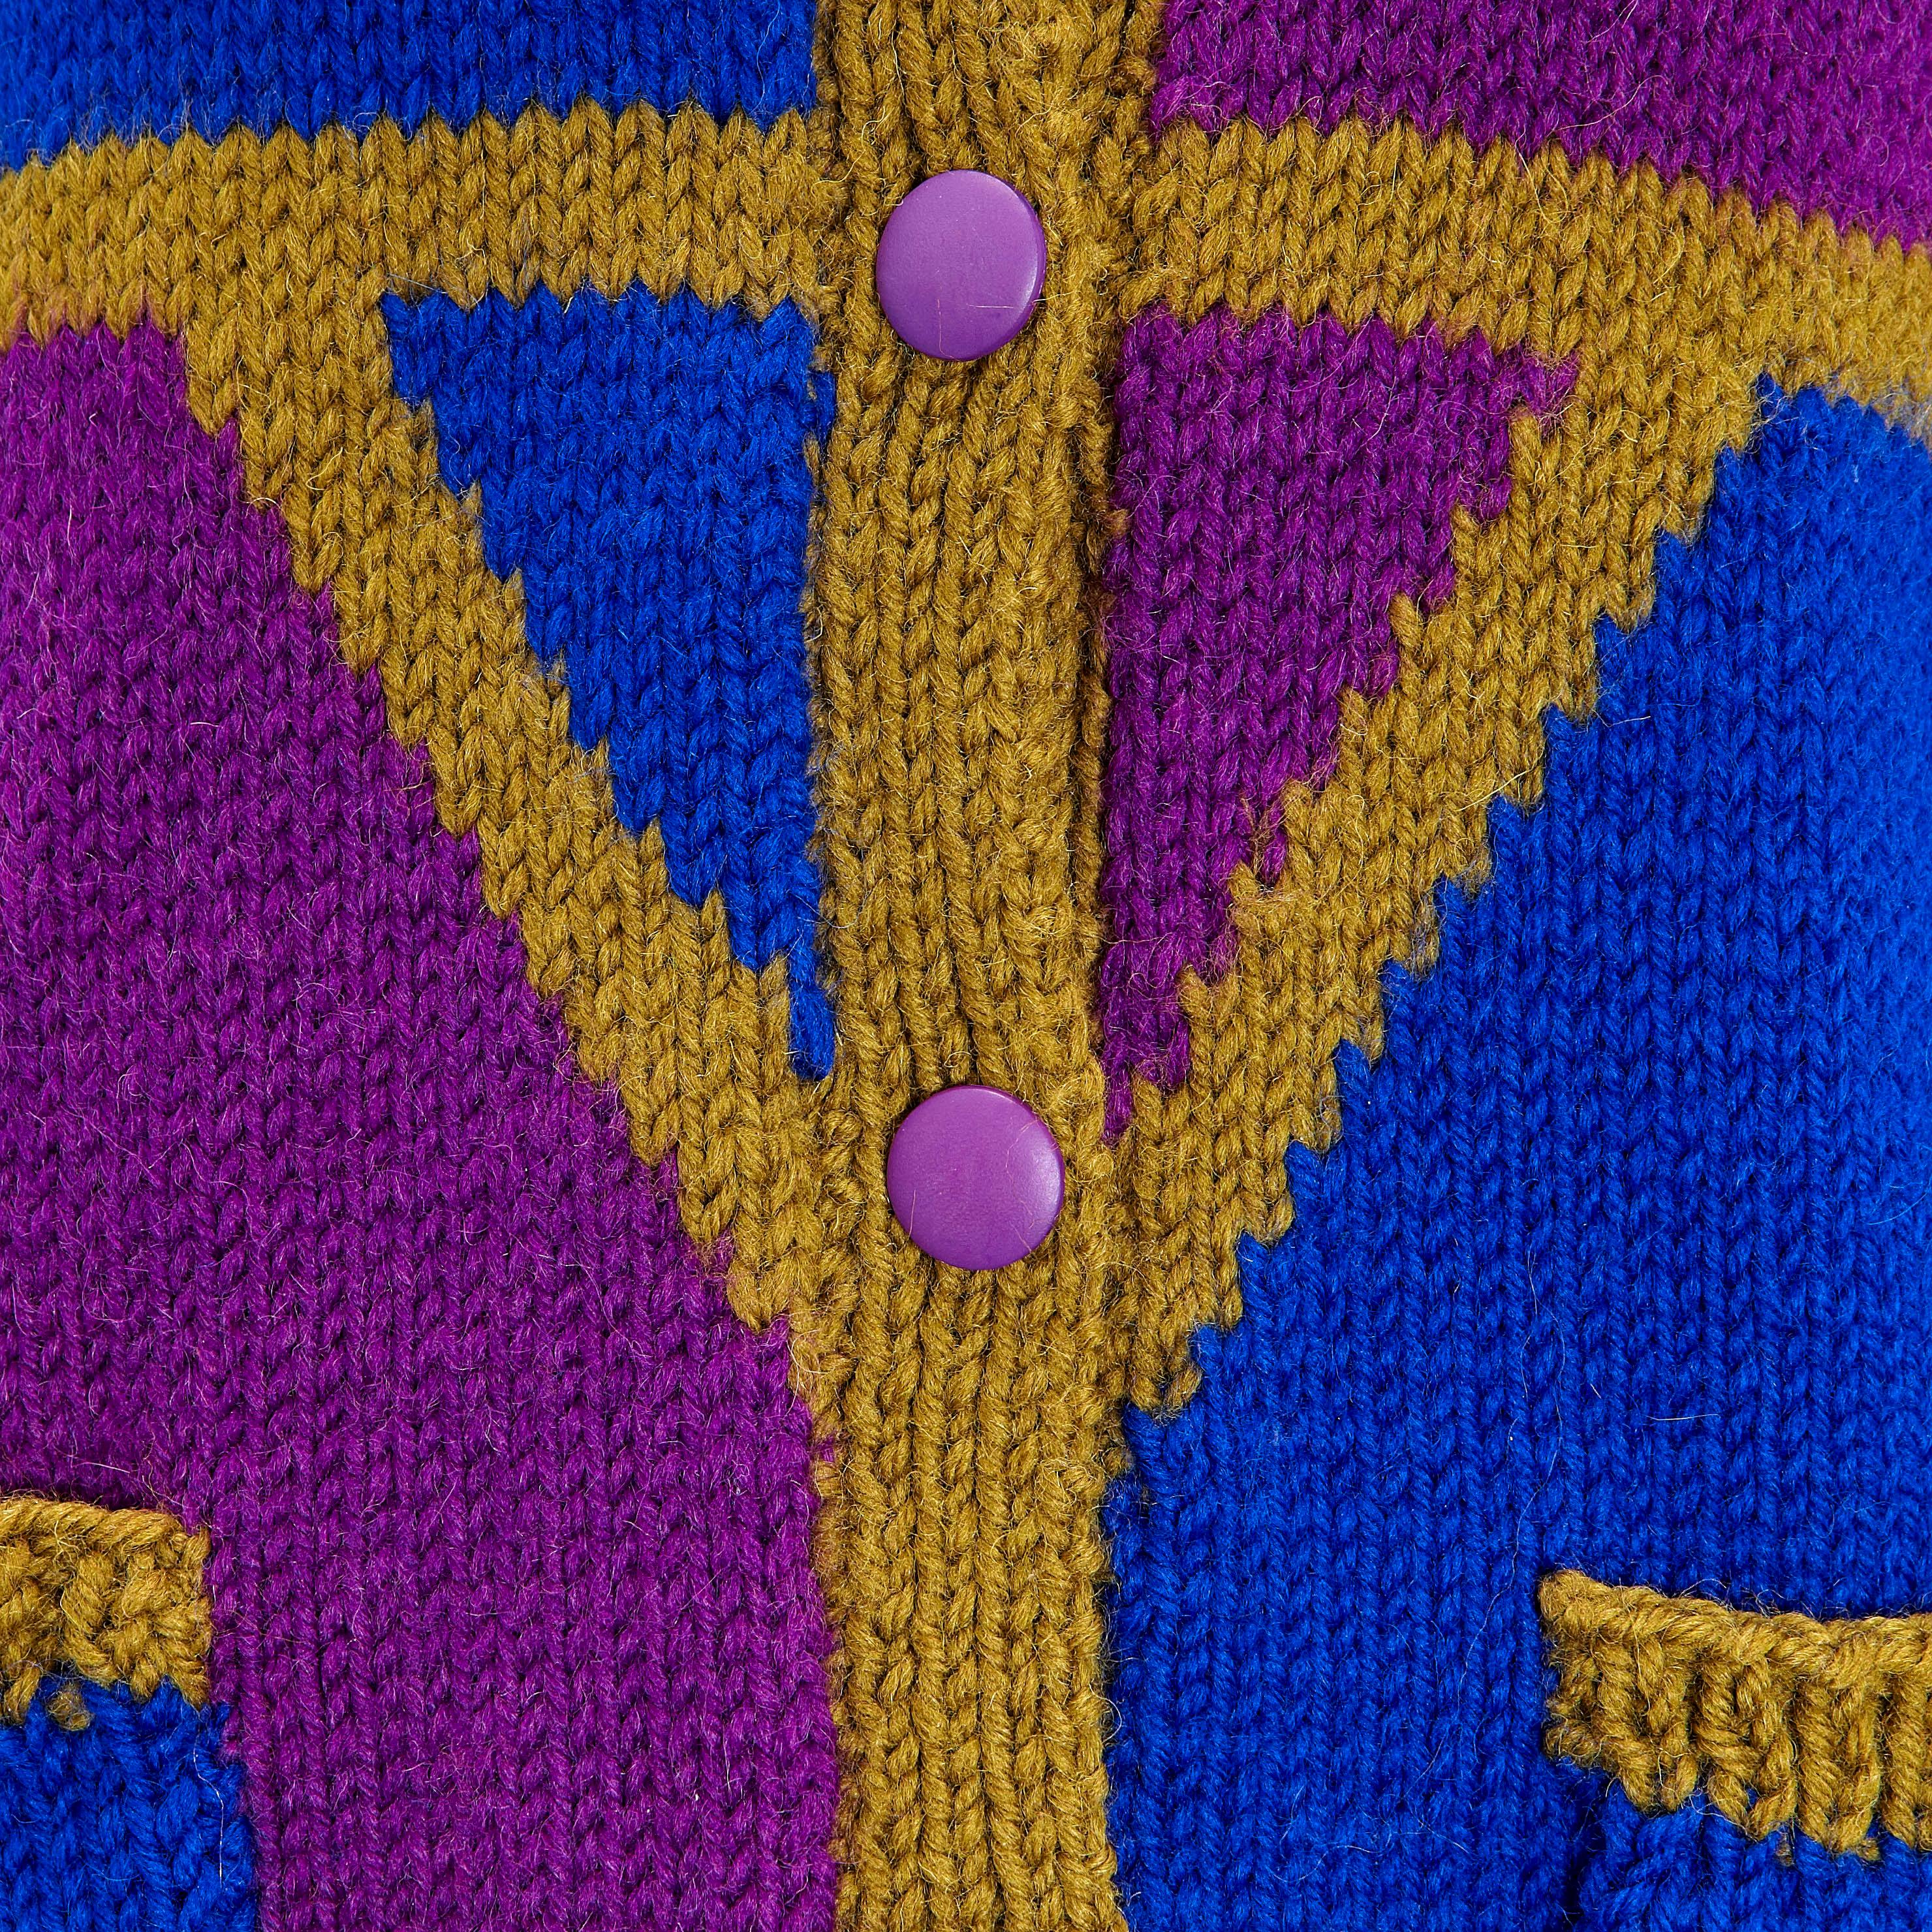 Product details: 1980s Vintage Cardigan Khaki Blue & Purple Hand Knit - Ribbed Knit Hem, Collar & Cuff Detail
Label: Unknown 
Fabric Content: Hand Knitted Wool
Size: UK 12
Bust: 42